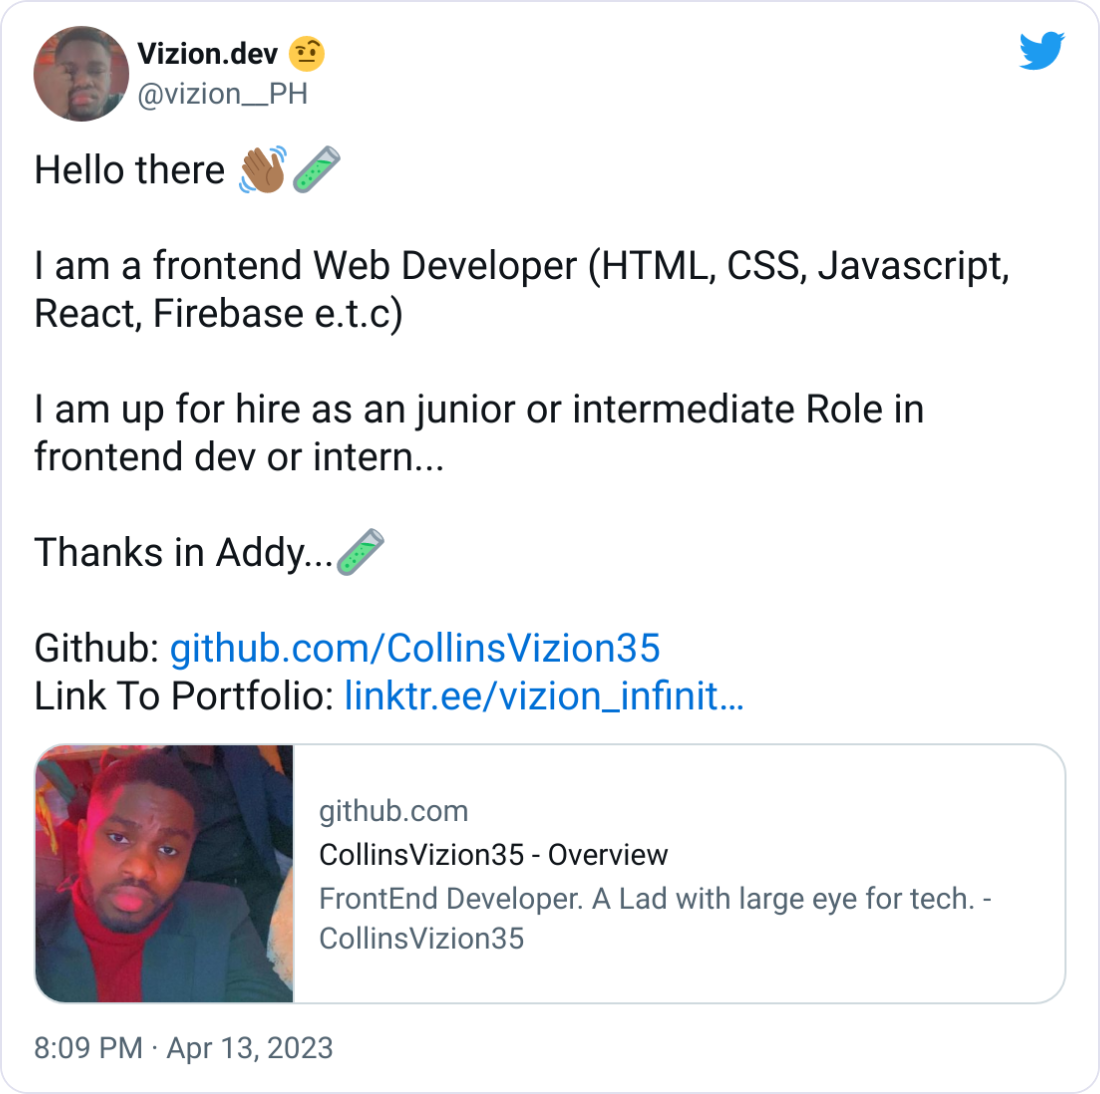 Hello there 👋🏾🧪  I am a frontend Web Developer (HTML, CSS, Javascript, React, Firebase e.t.c)  I am up for hire as an junior or intermediate Role in frontend dev or intern...  Thanks in Addy...🧪  Github: https://github.com/CollinsVizion35 Link To Portfolio: https://linktr.ee/vizion_infinite_concept